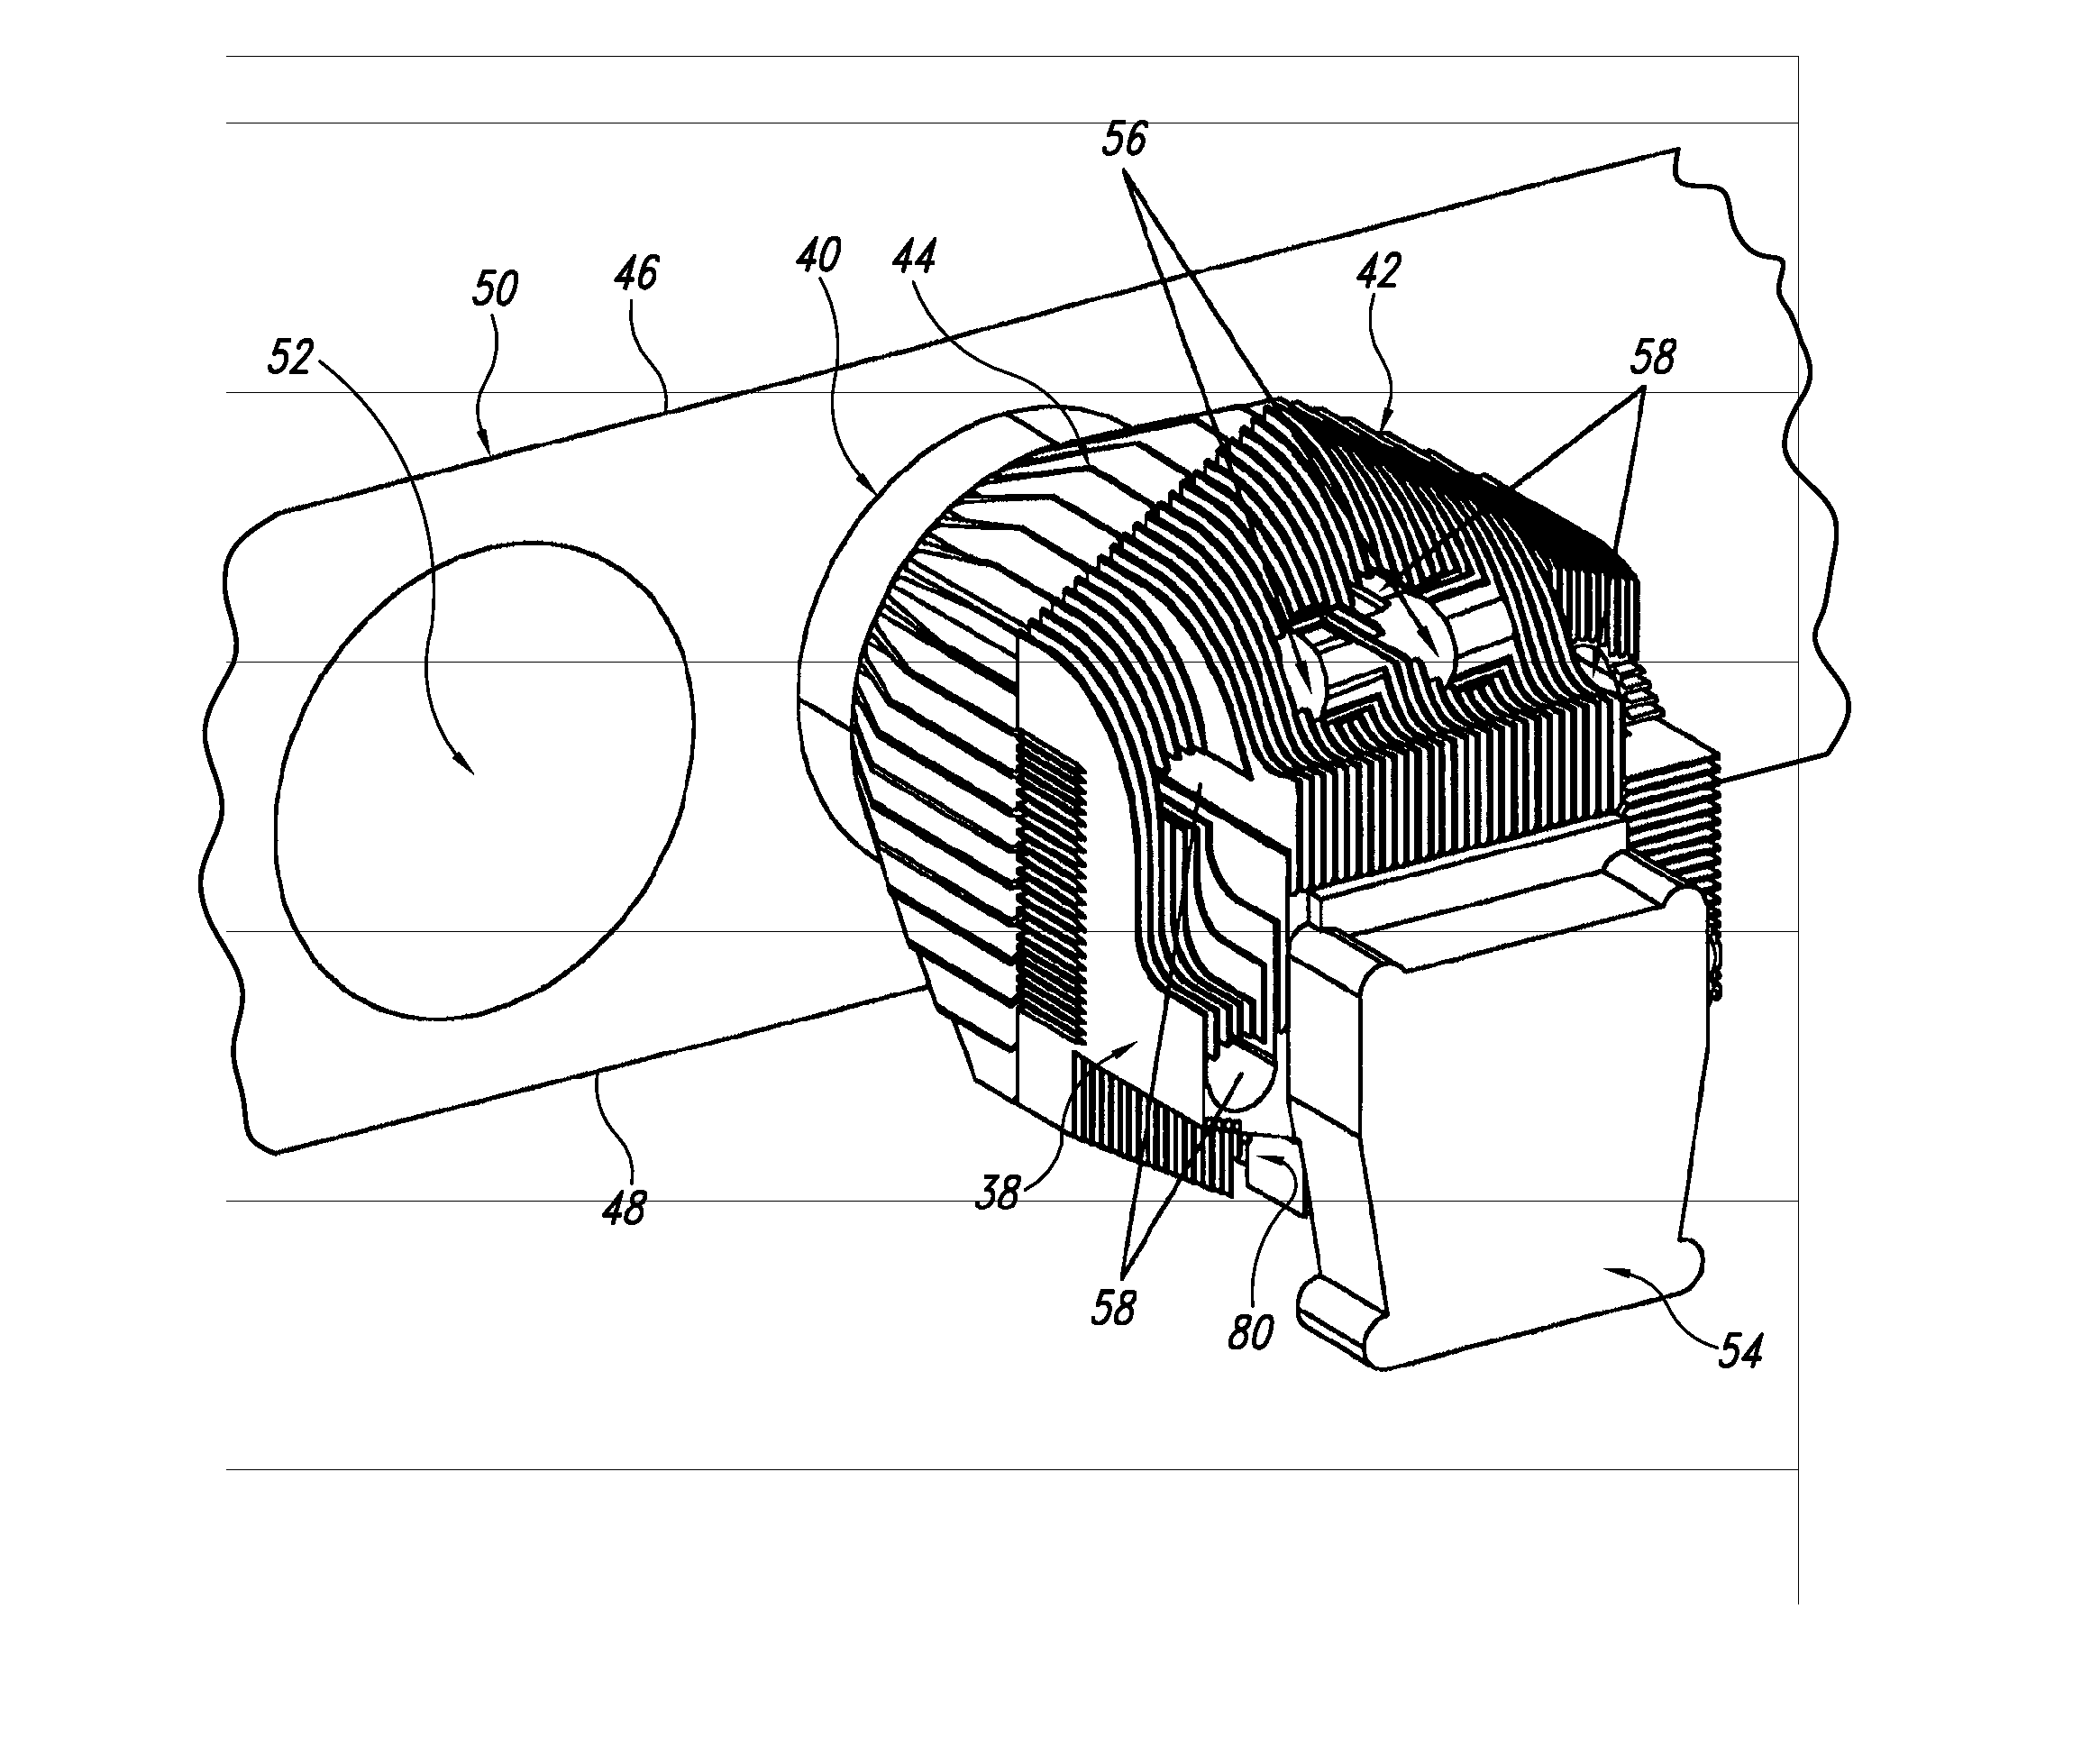 Axial flow cooling for air-cooled engines